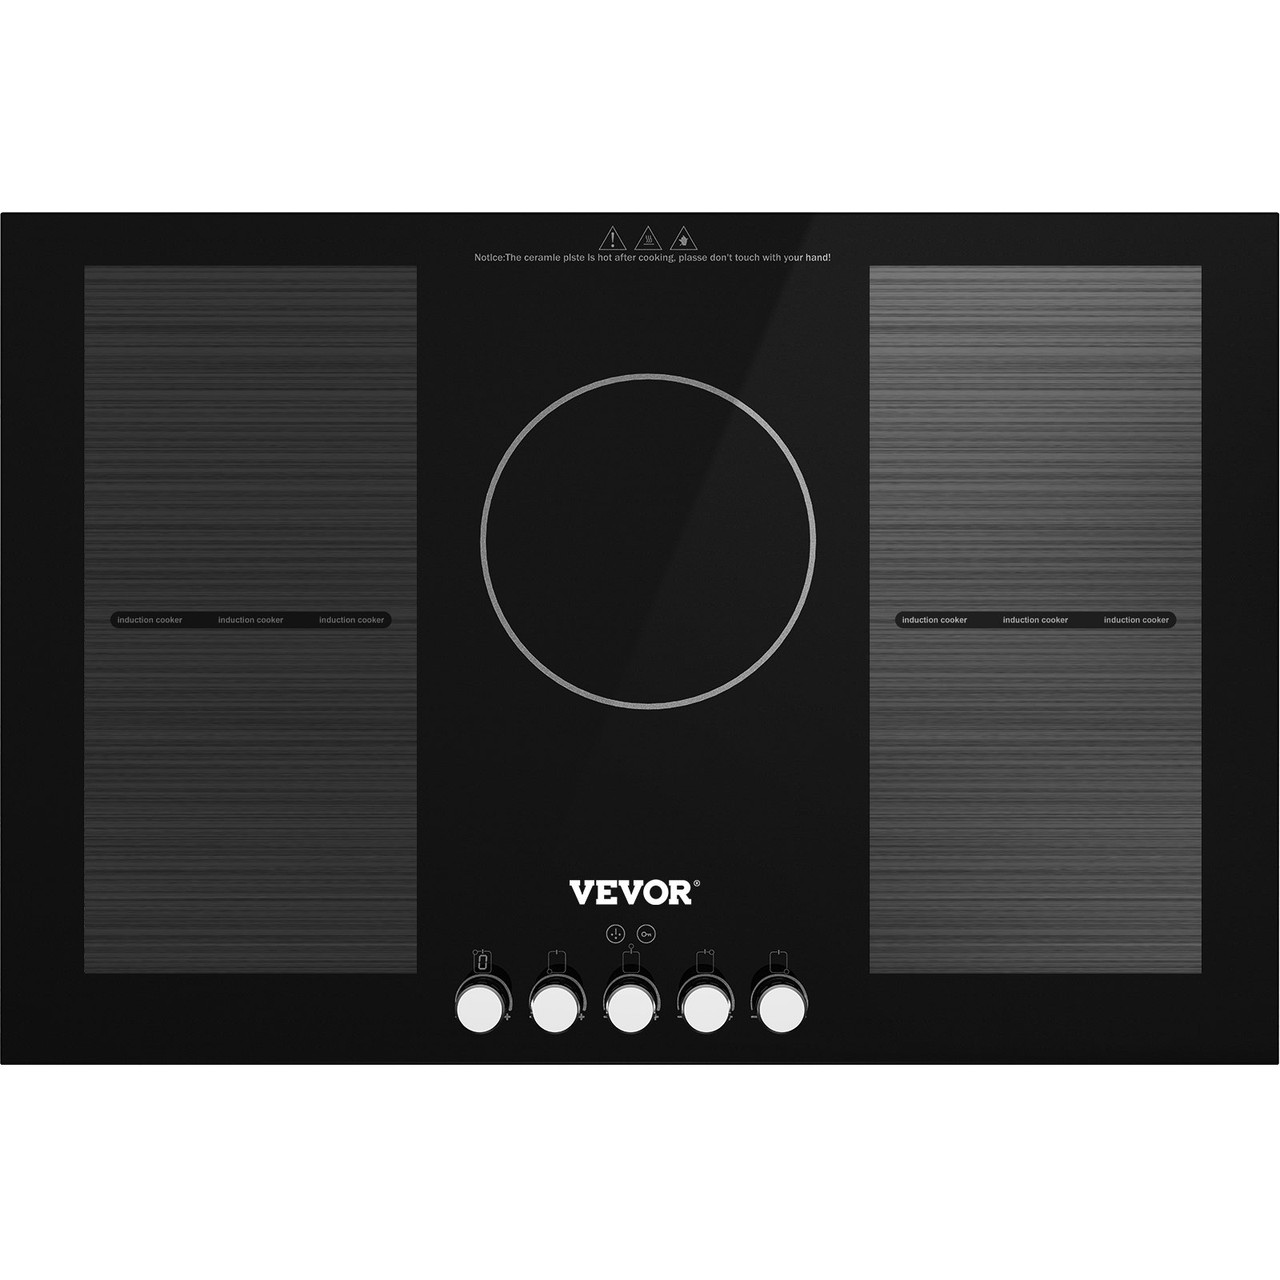 Built-in Induction Cooktop, 30 inch 5 Burners, 220V Ceramic Glass Electric Stove Top with Knob Control, Timer & Child Lock Included, 9 Power Levels with Boost Function for Simmer Steam Fry